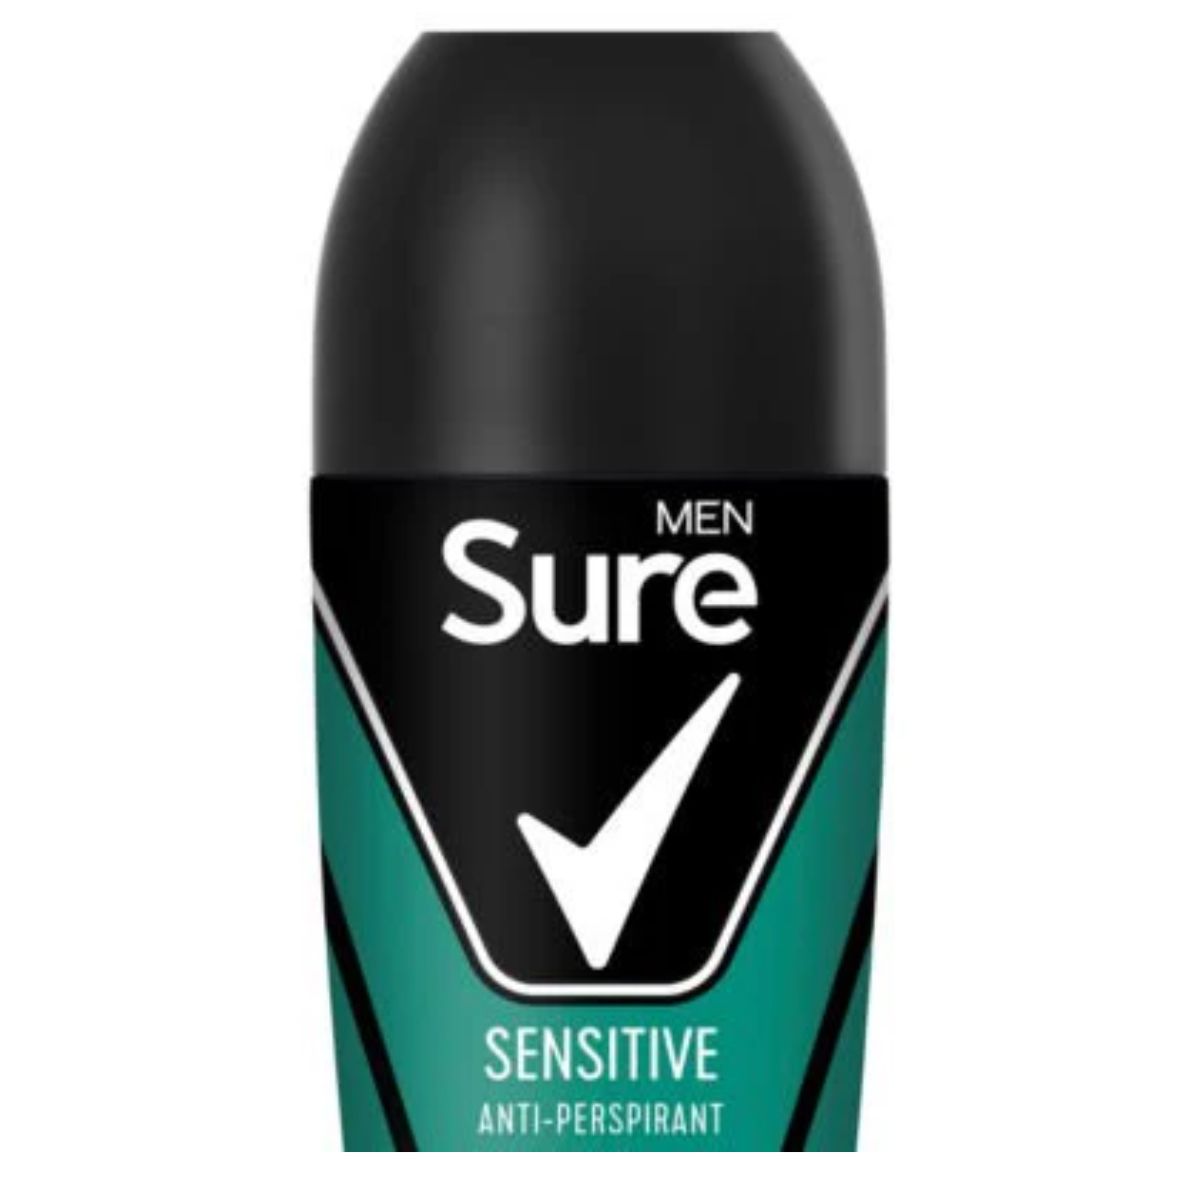 A black and teal bottle of Sure Men - Sensitive Roll On - 50ml deodorant with a large white checkmark on the label.